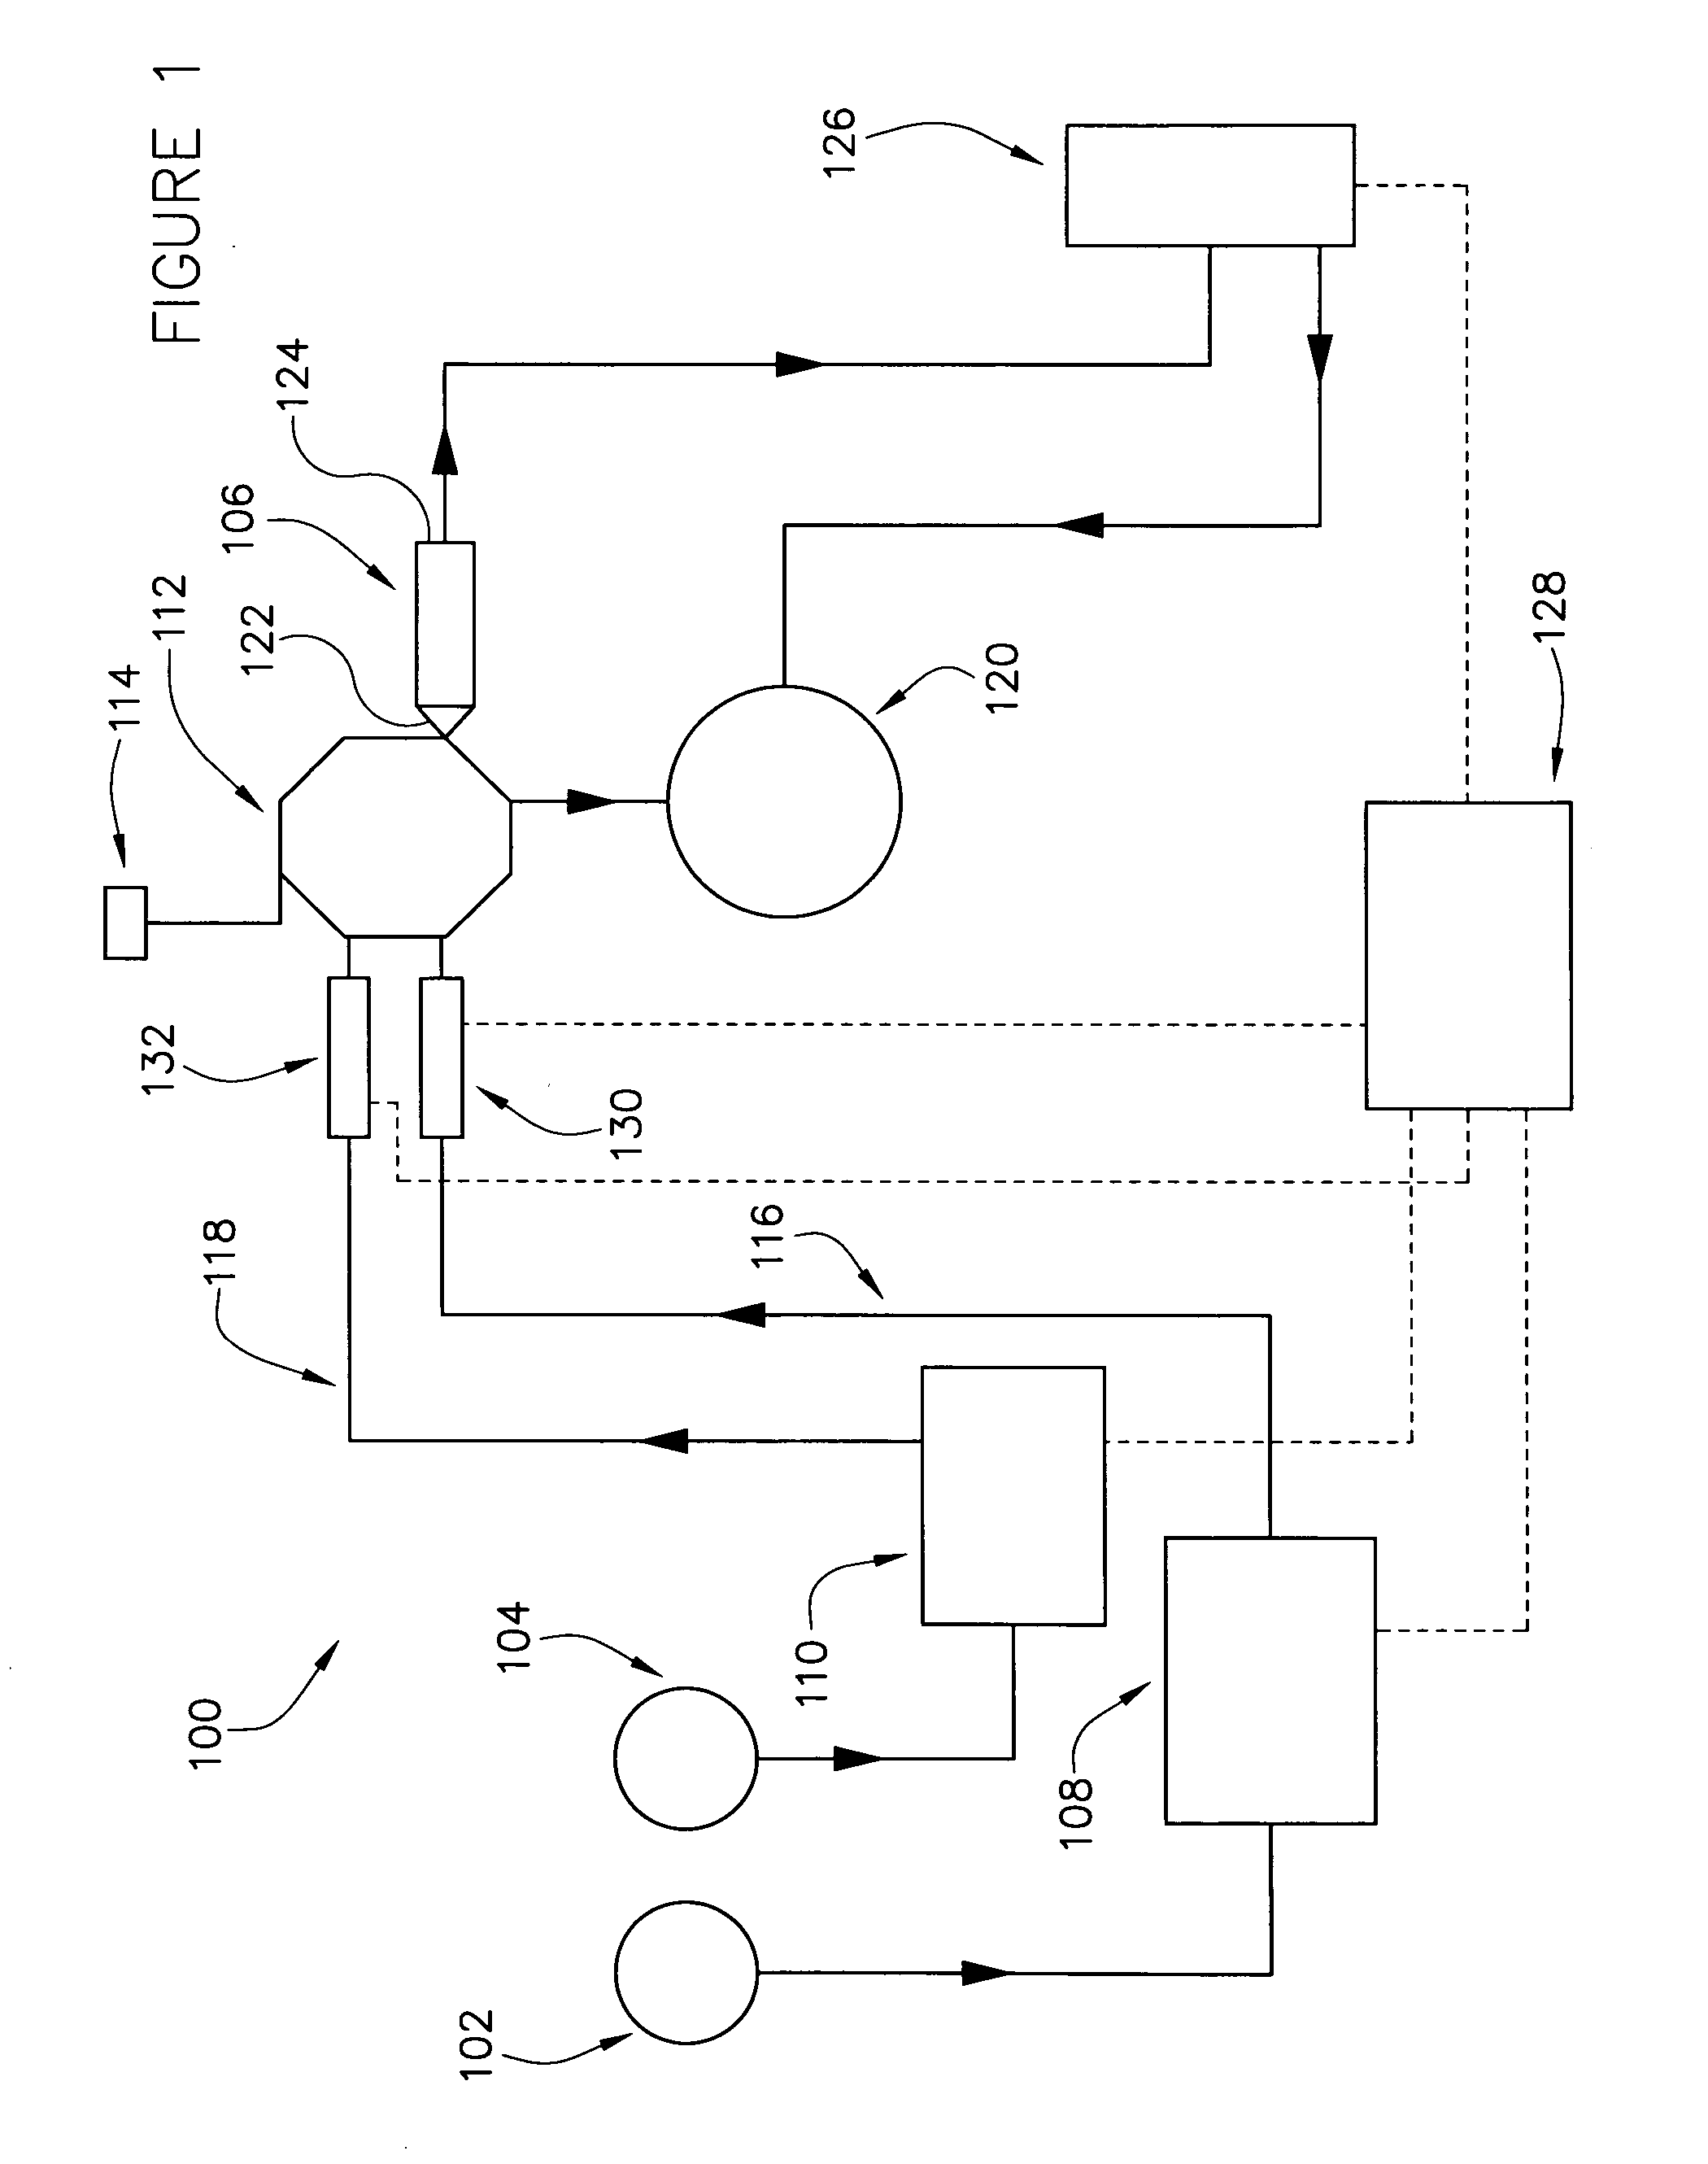 System and method for rapid chromatography with fluid temperature and mobile phase composition control